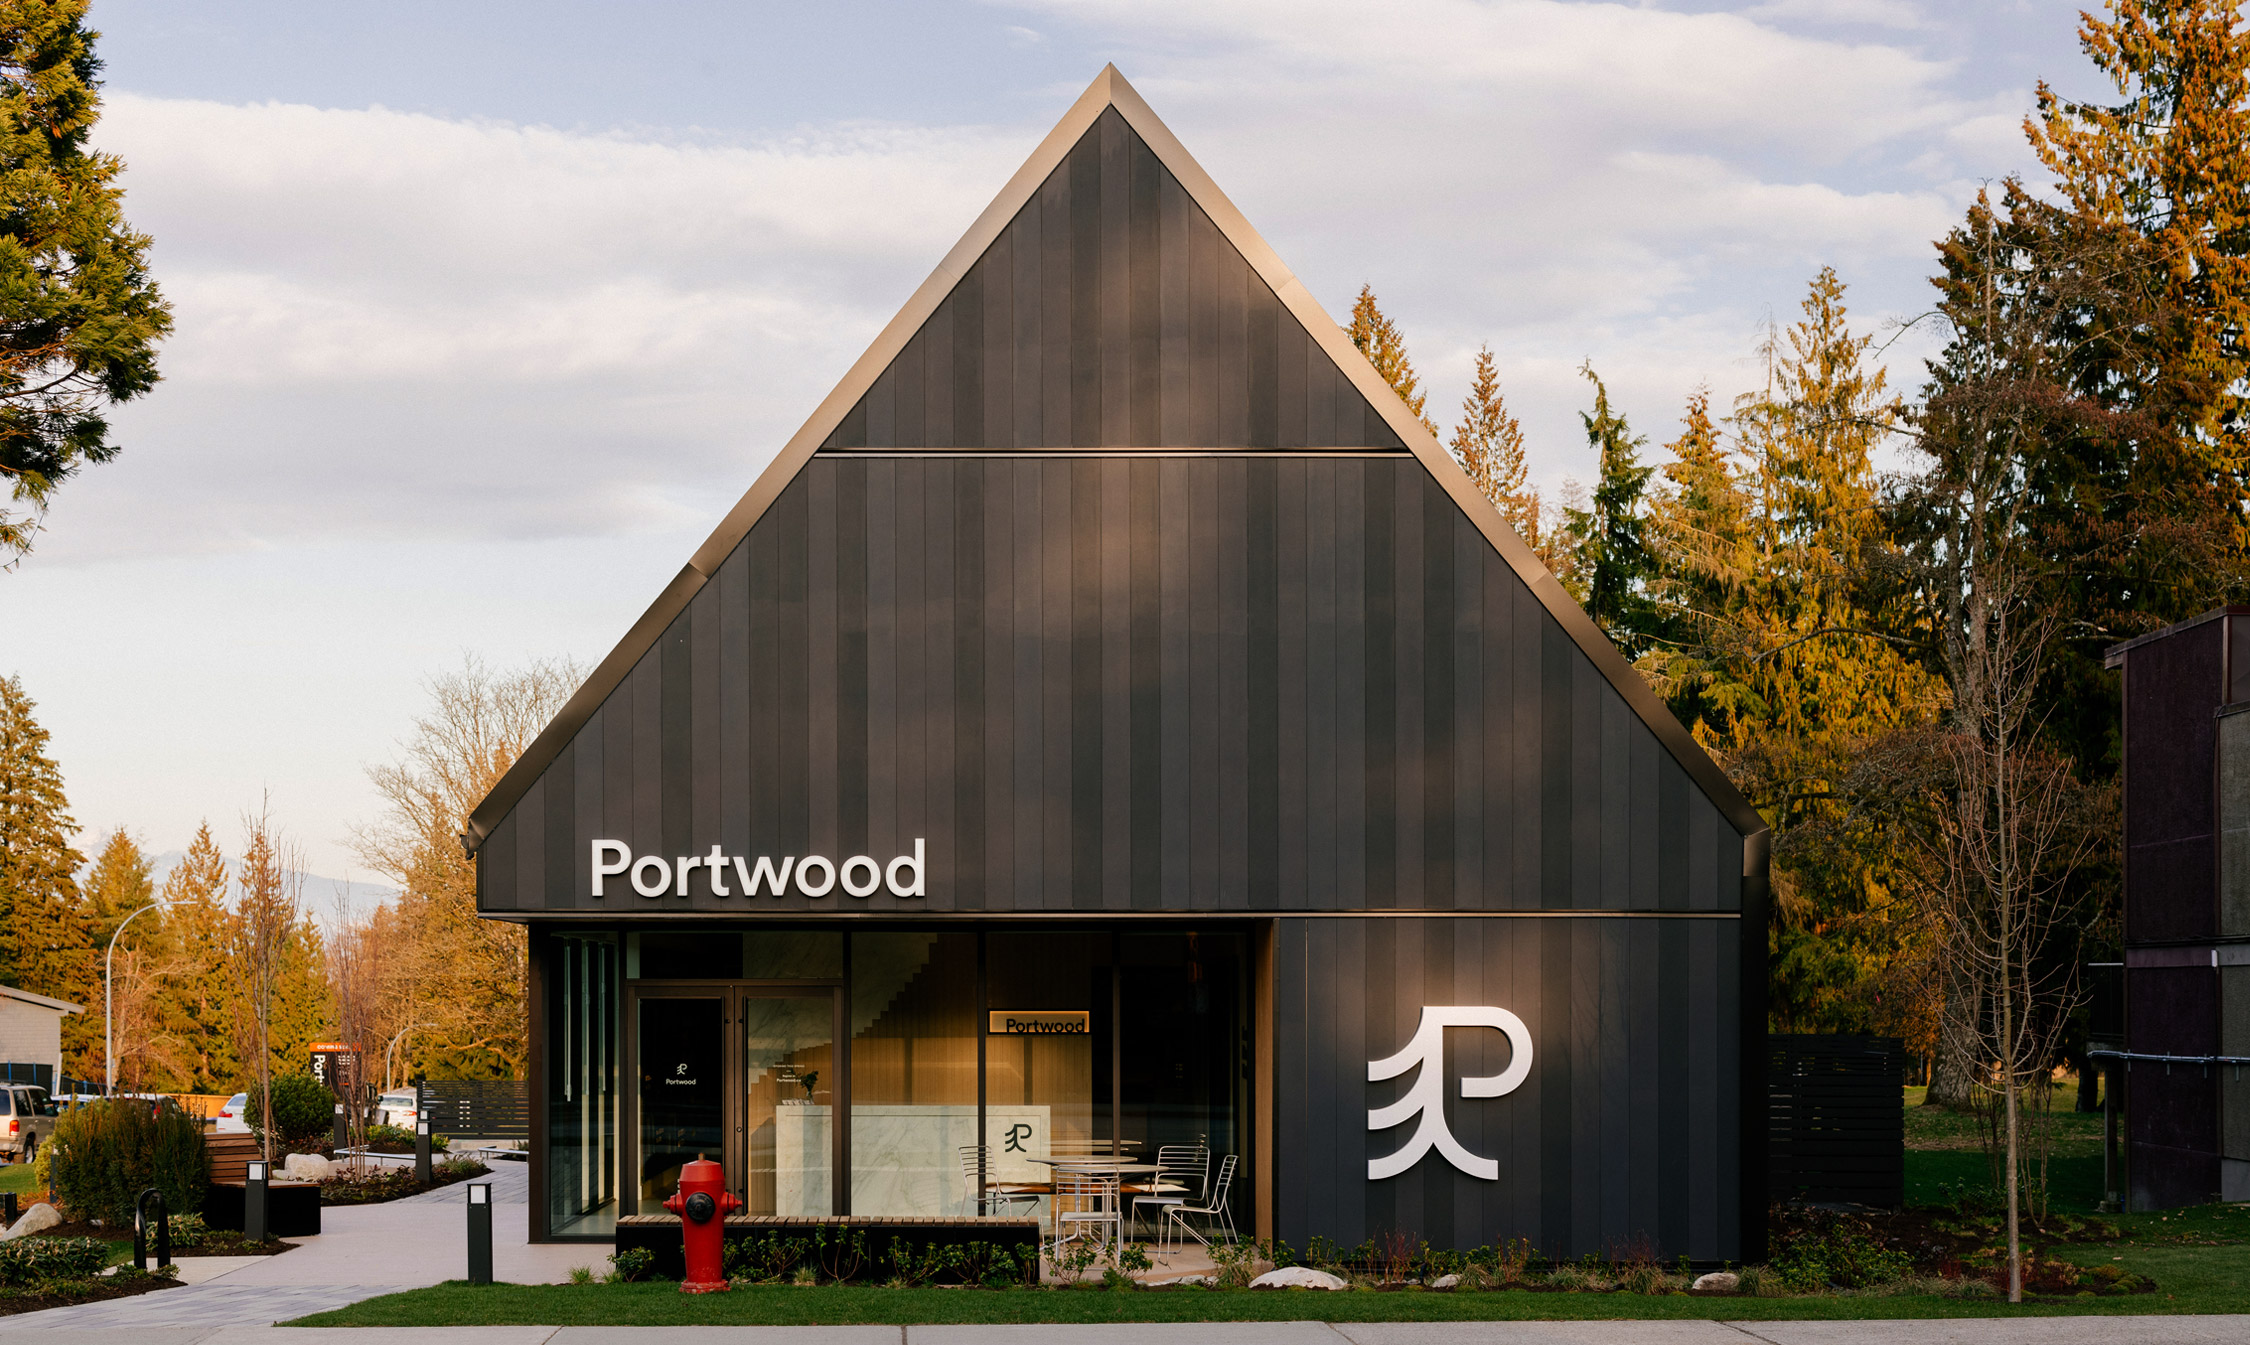 Home & Nature, Nurtured. Portwood Brings a 23 Acre Green Community to Port Moody.